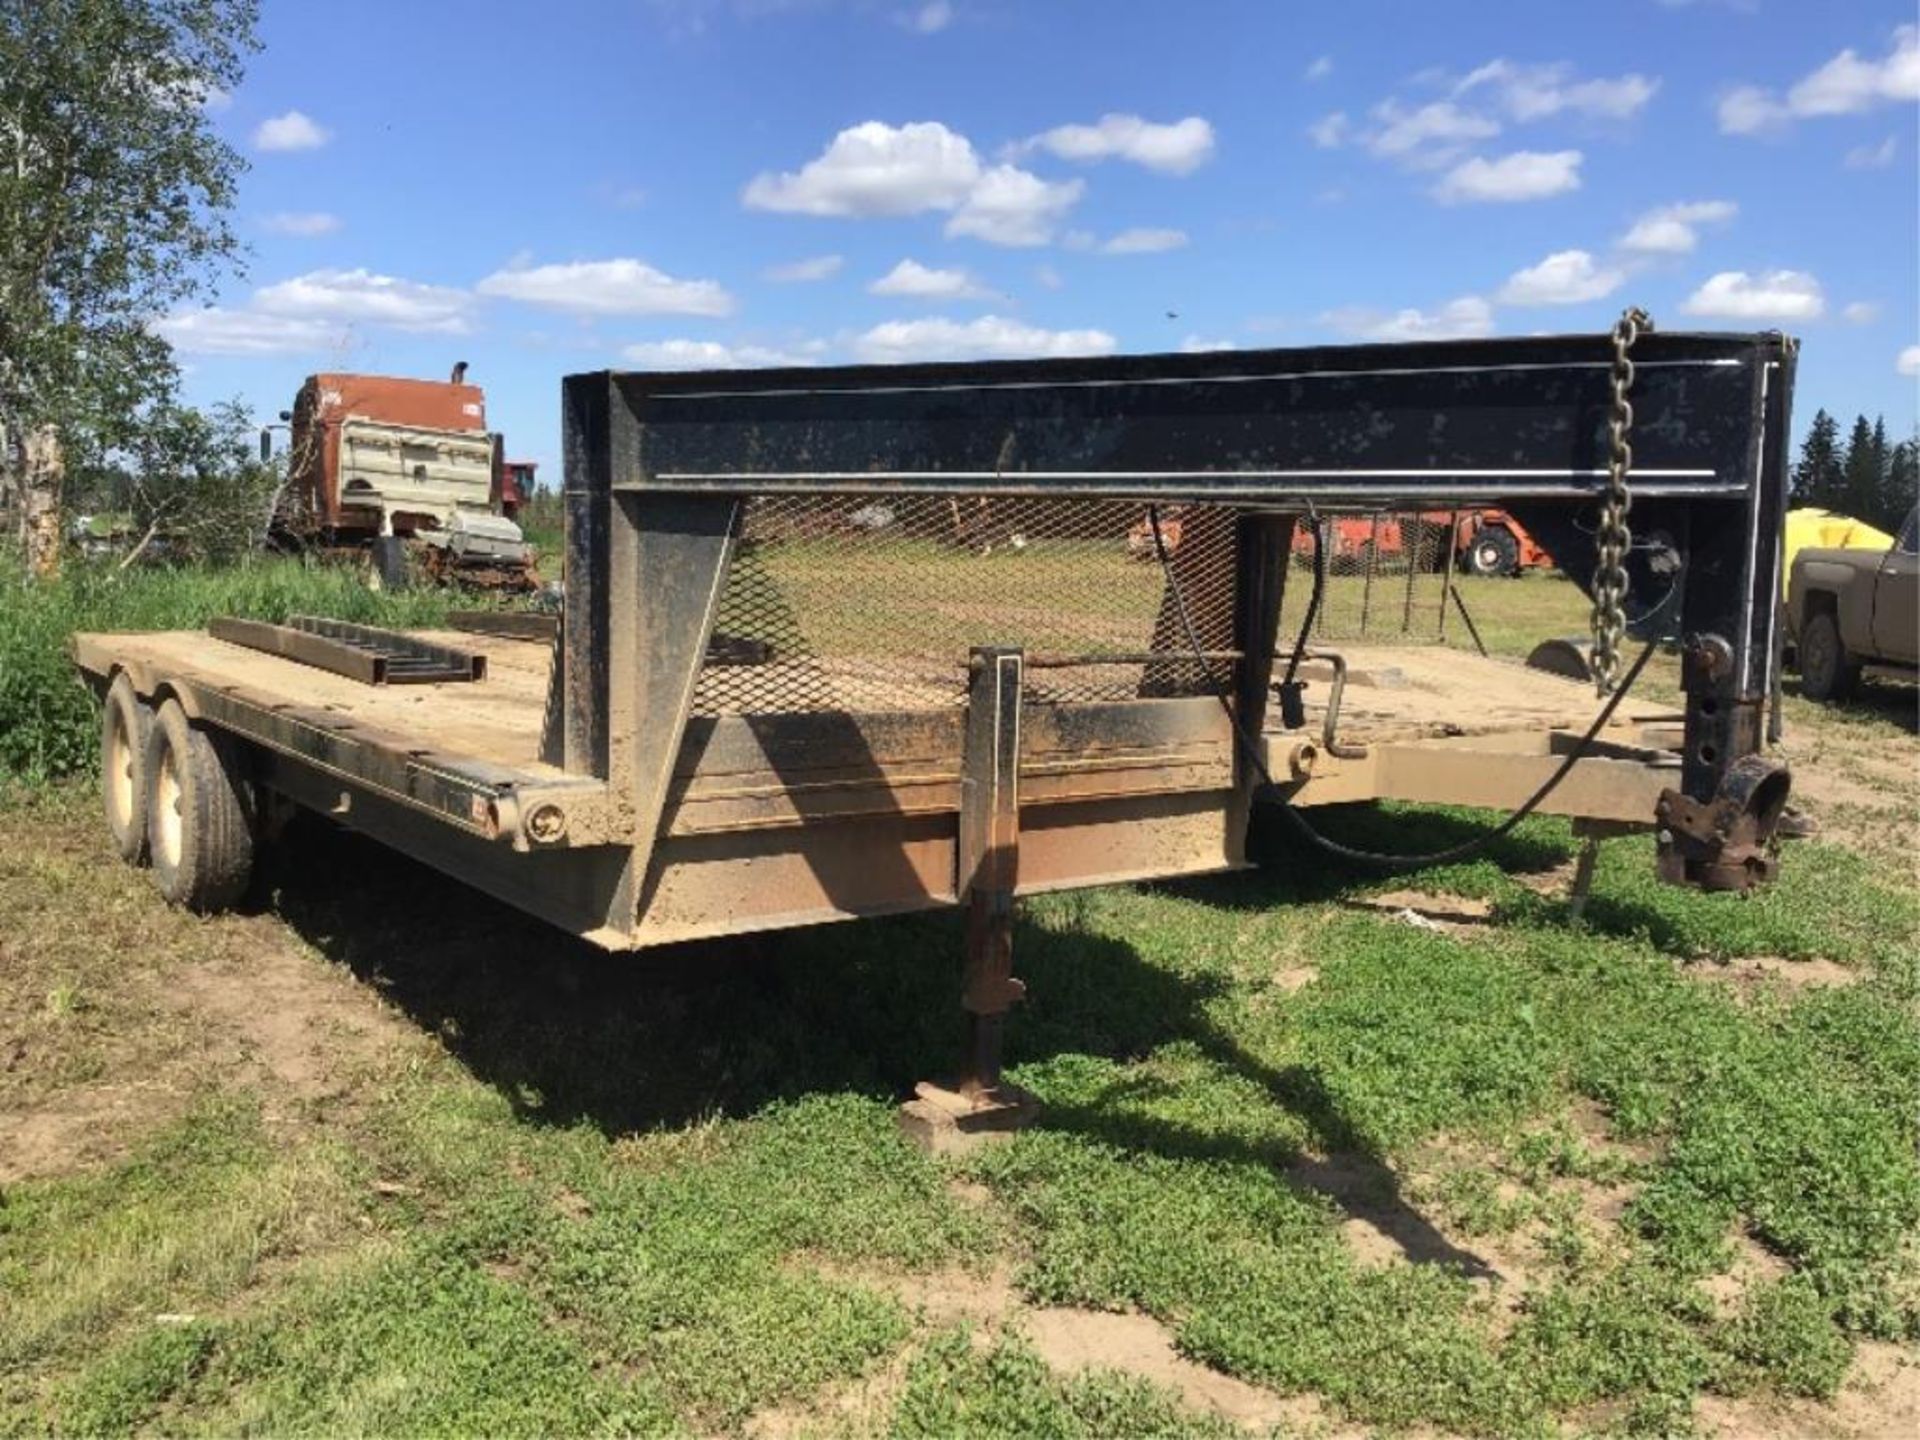 1985 Wy-Lee 18ft T/A Gooseneck Hitch Deck Trailer VIN 2W9FG18F371005004 7000lb Axles, Loading Ramps. - Image 2 of 6